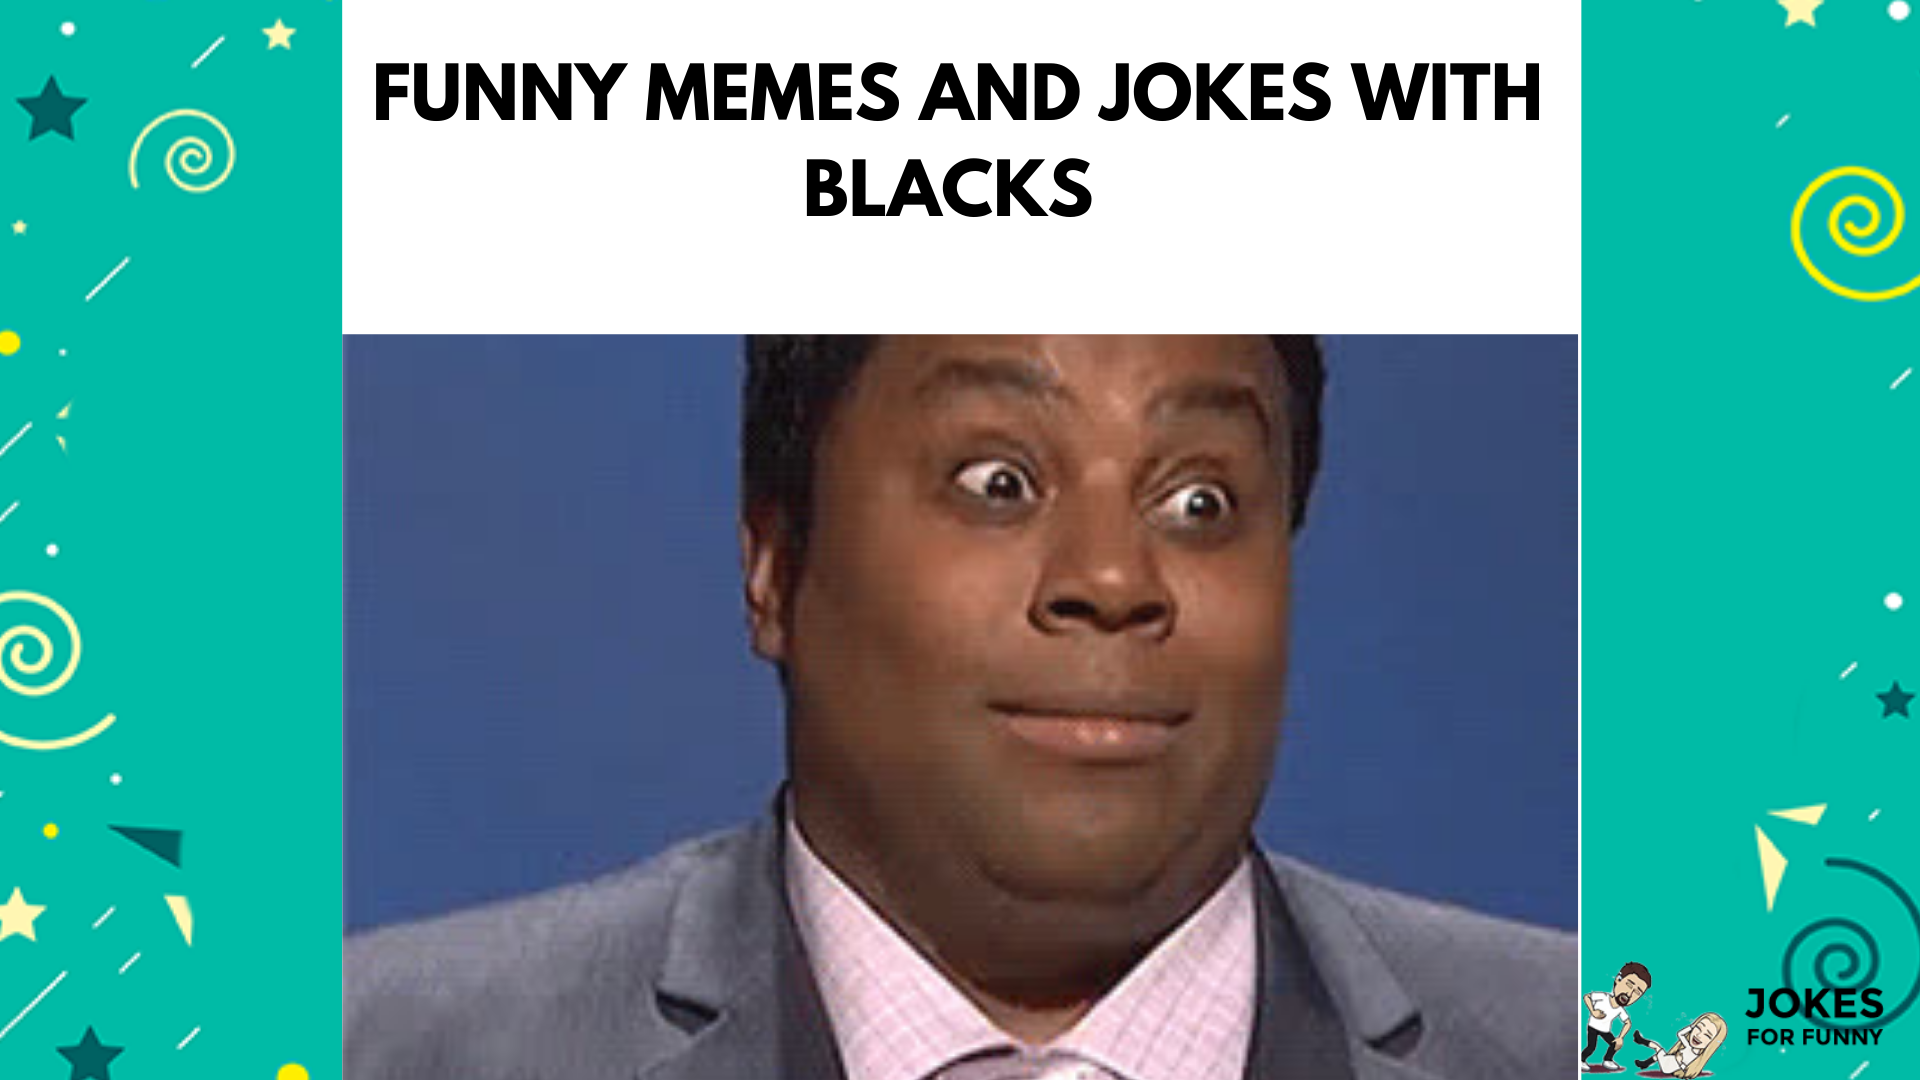 Funny Memes And Jokes With Blacks (no racist) - Jokes for funny